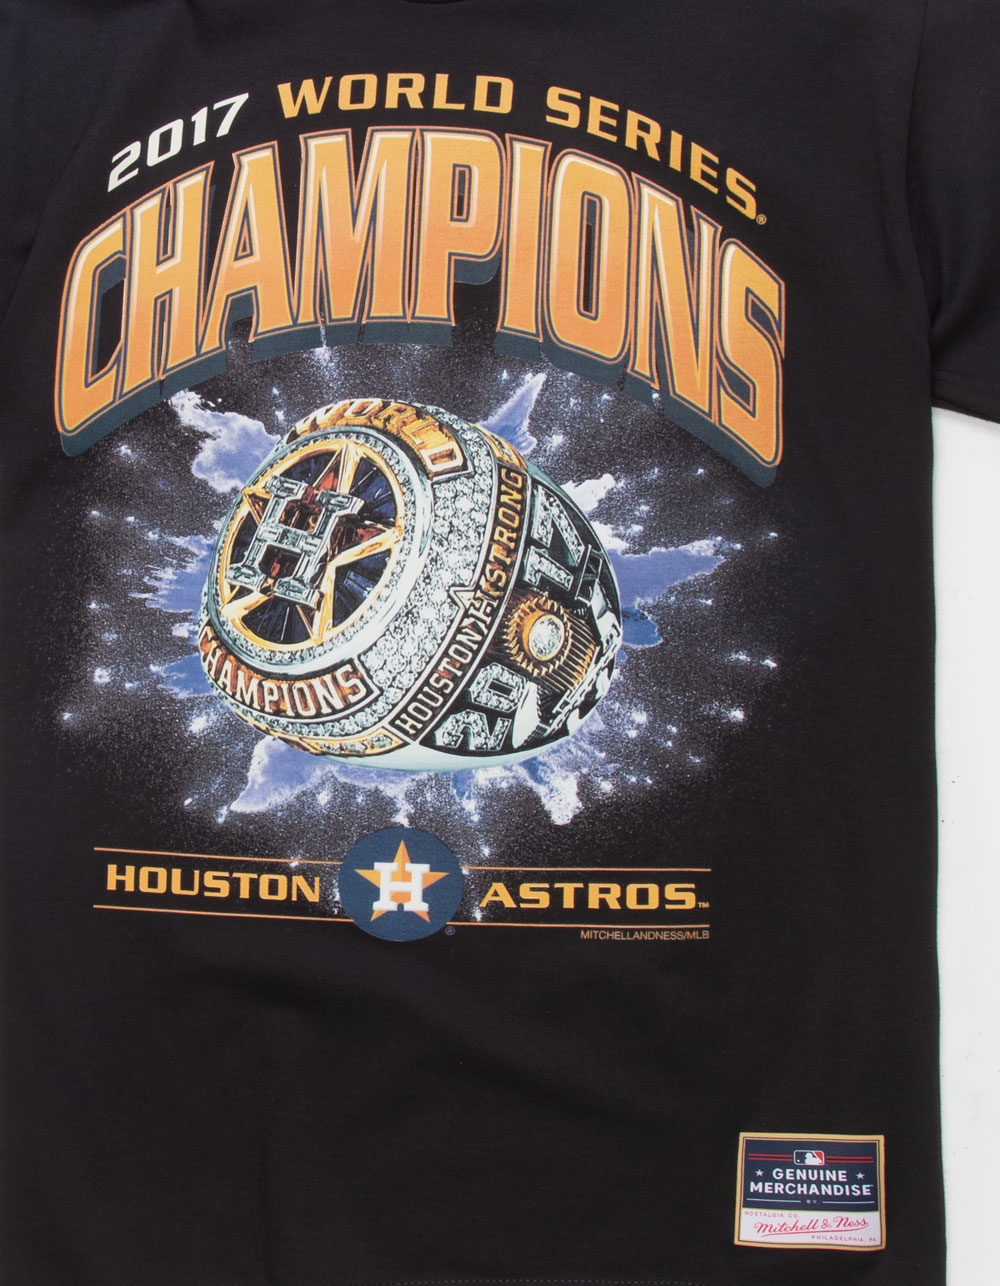 Houston Astros on X: Wear what the Champions wear! The Astros